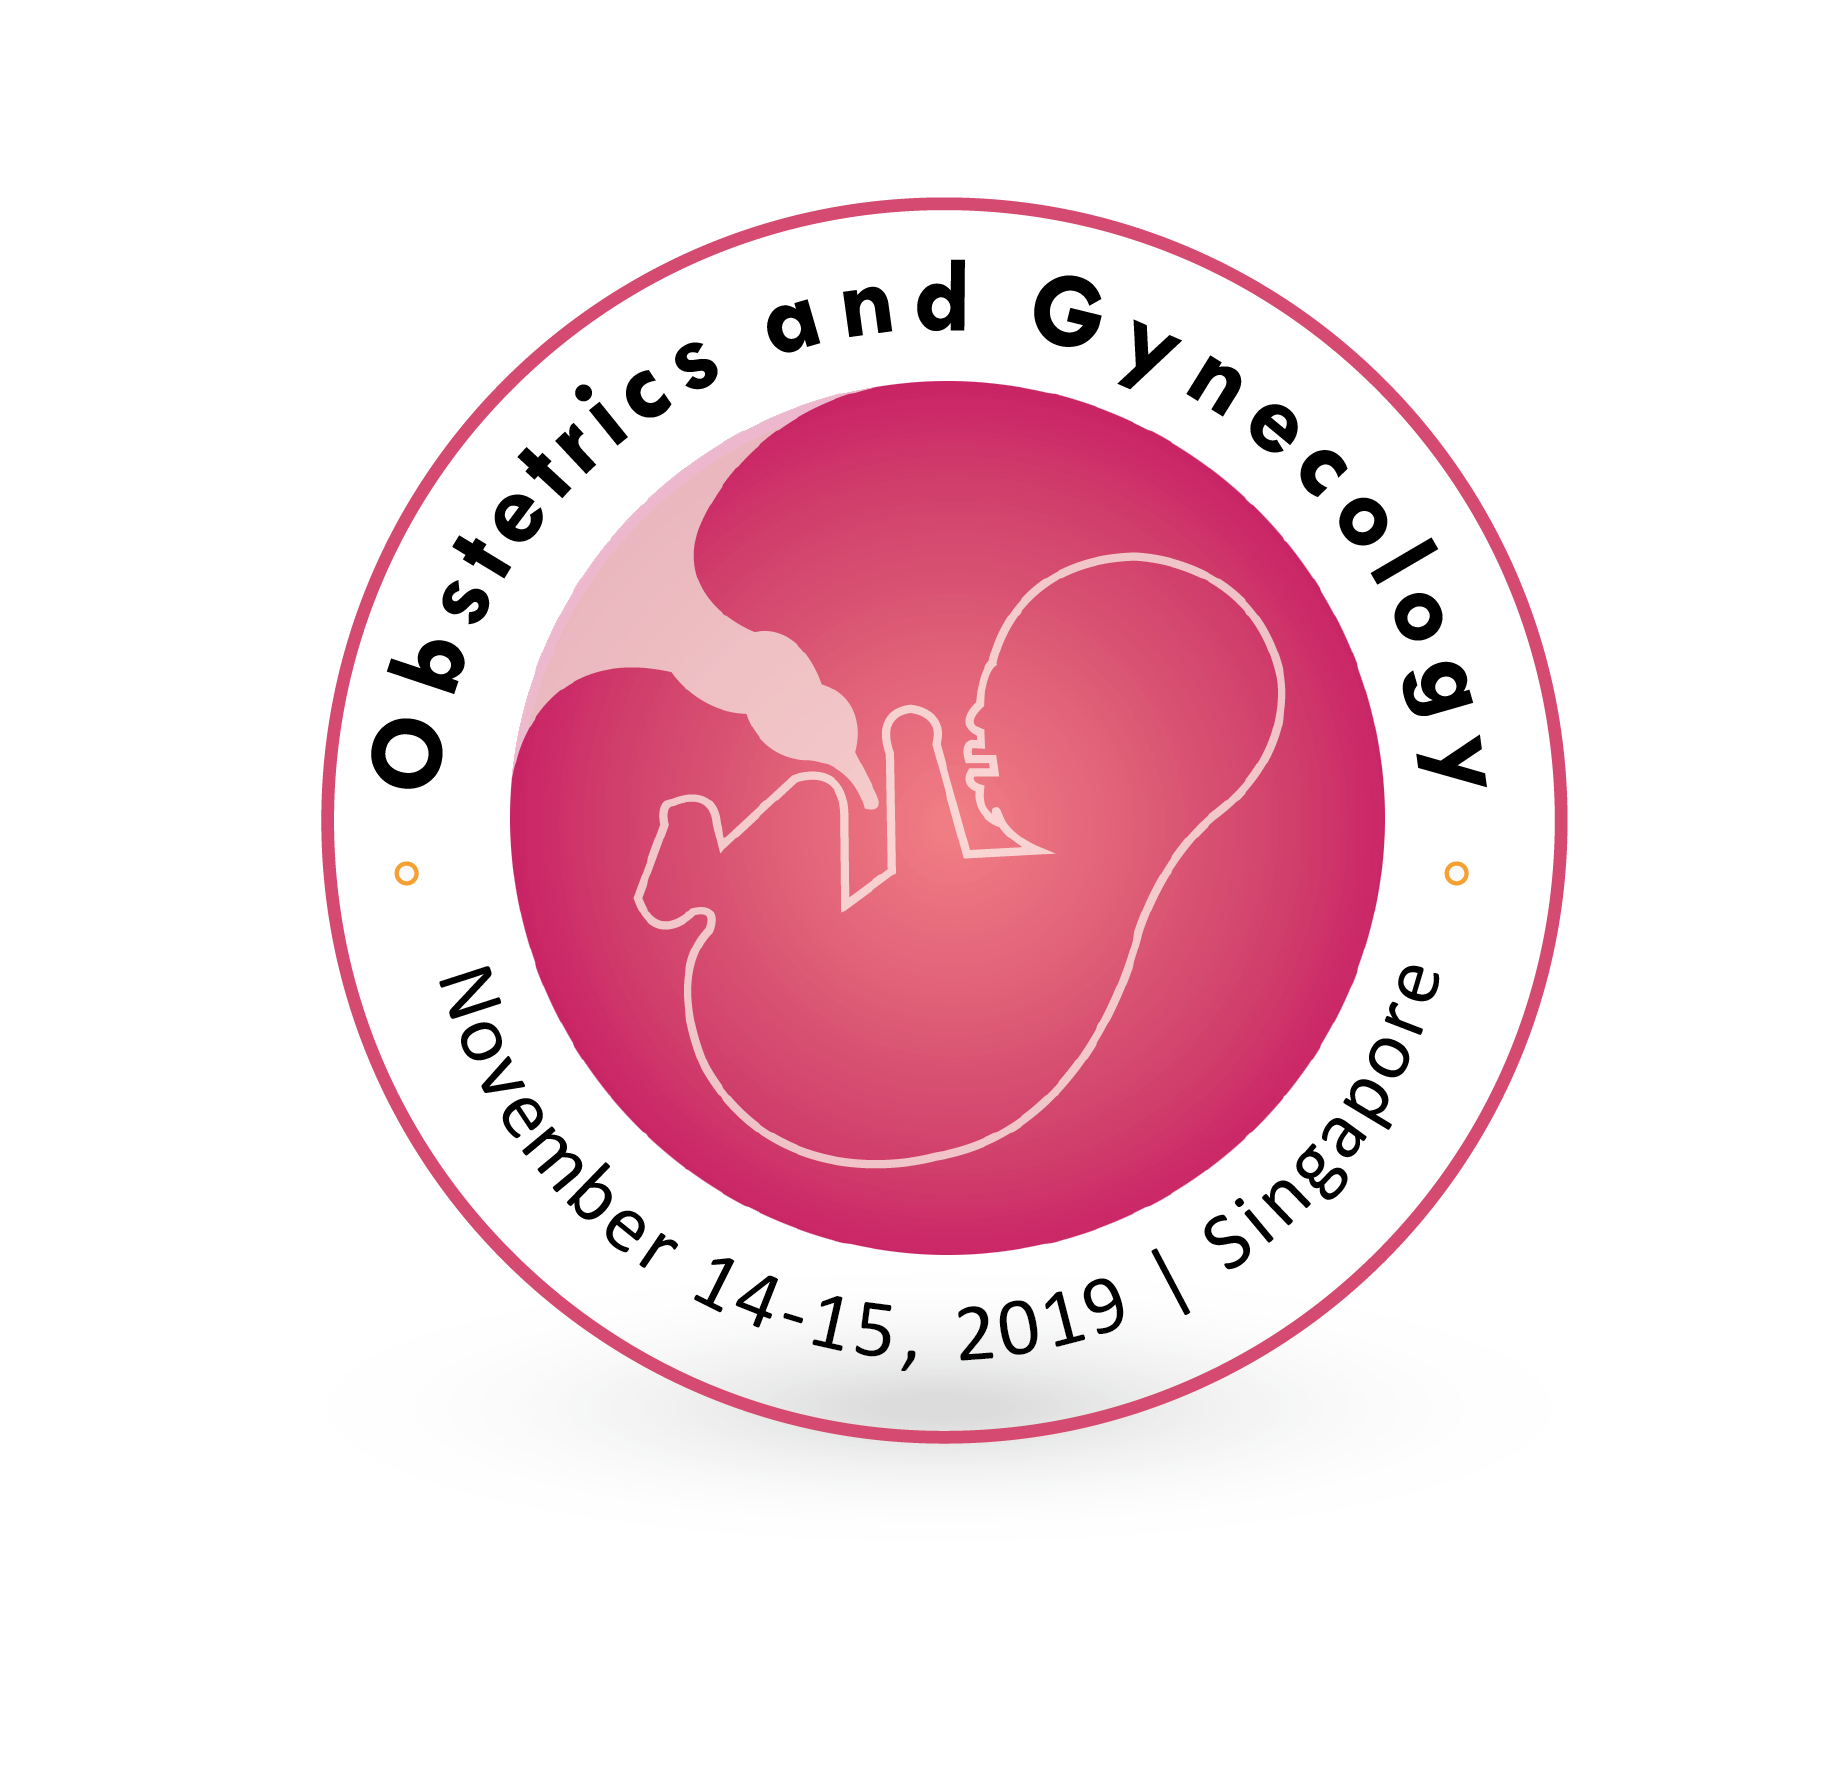 4th International Conference on Obstetrics and Gynecology 